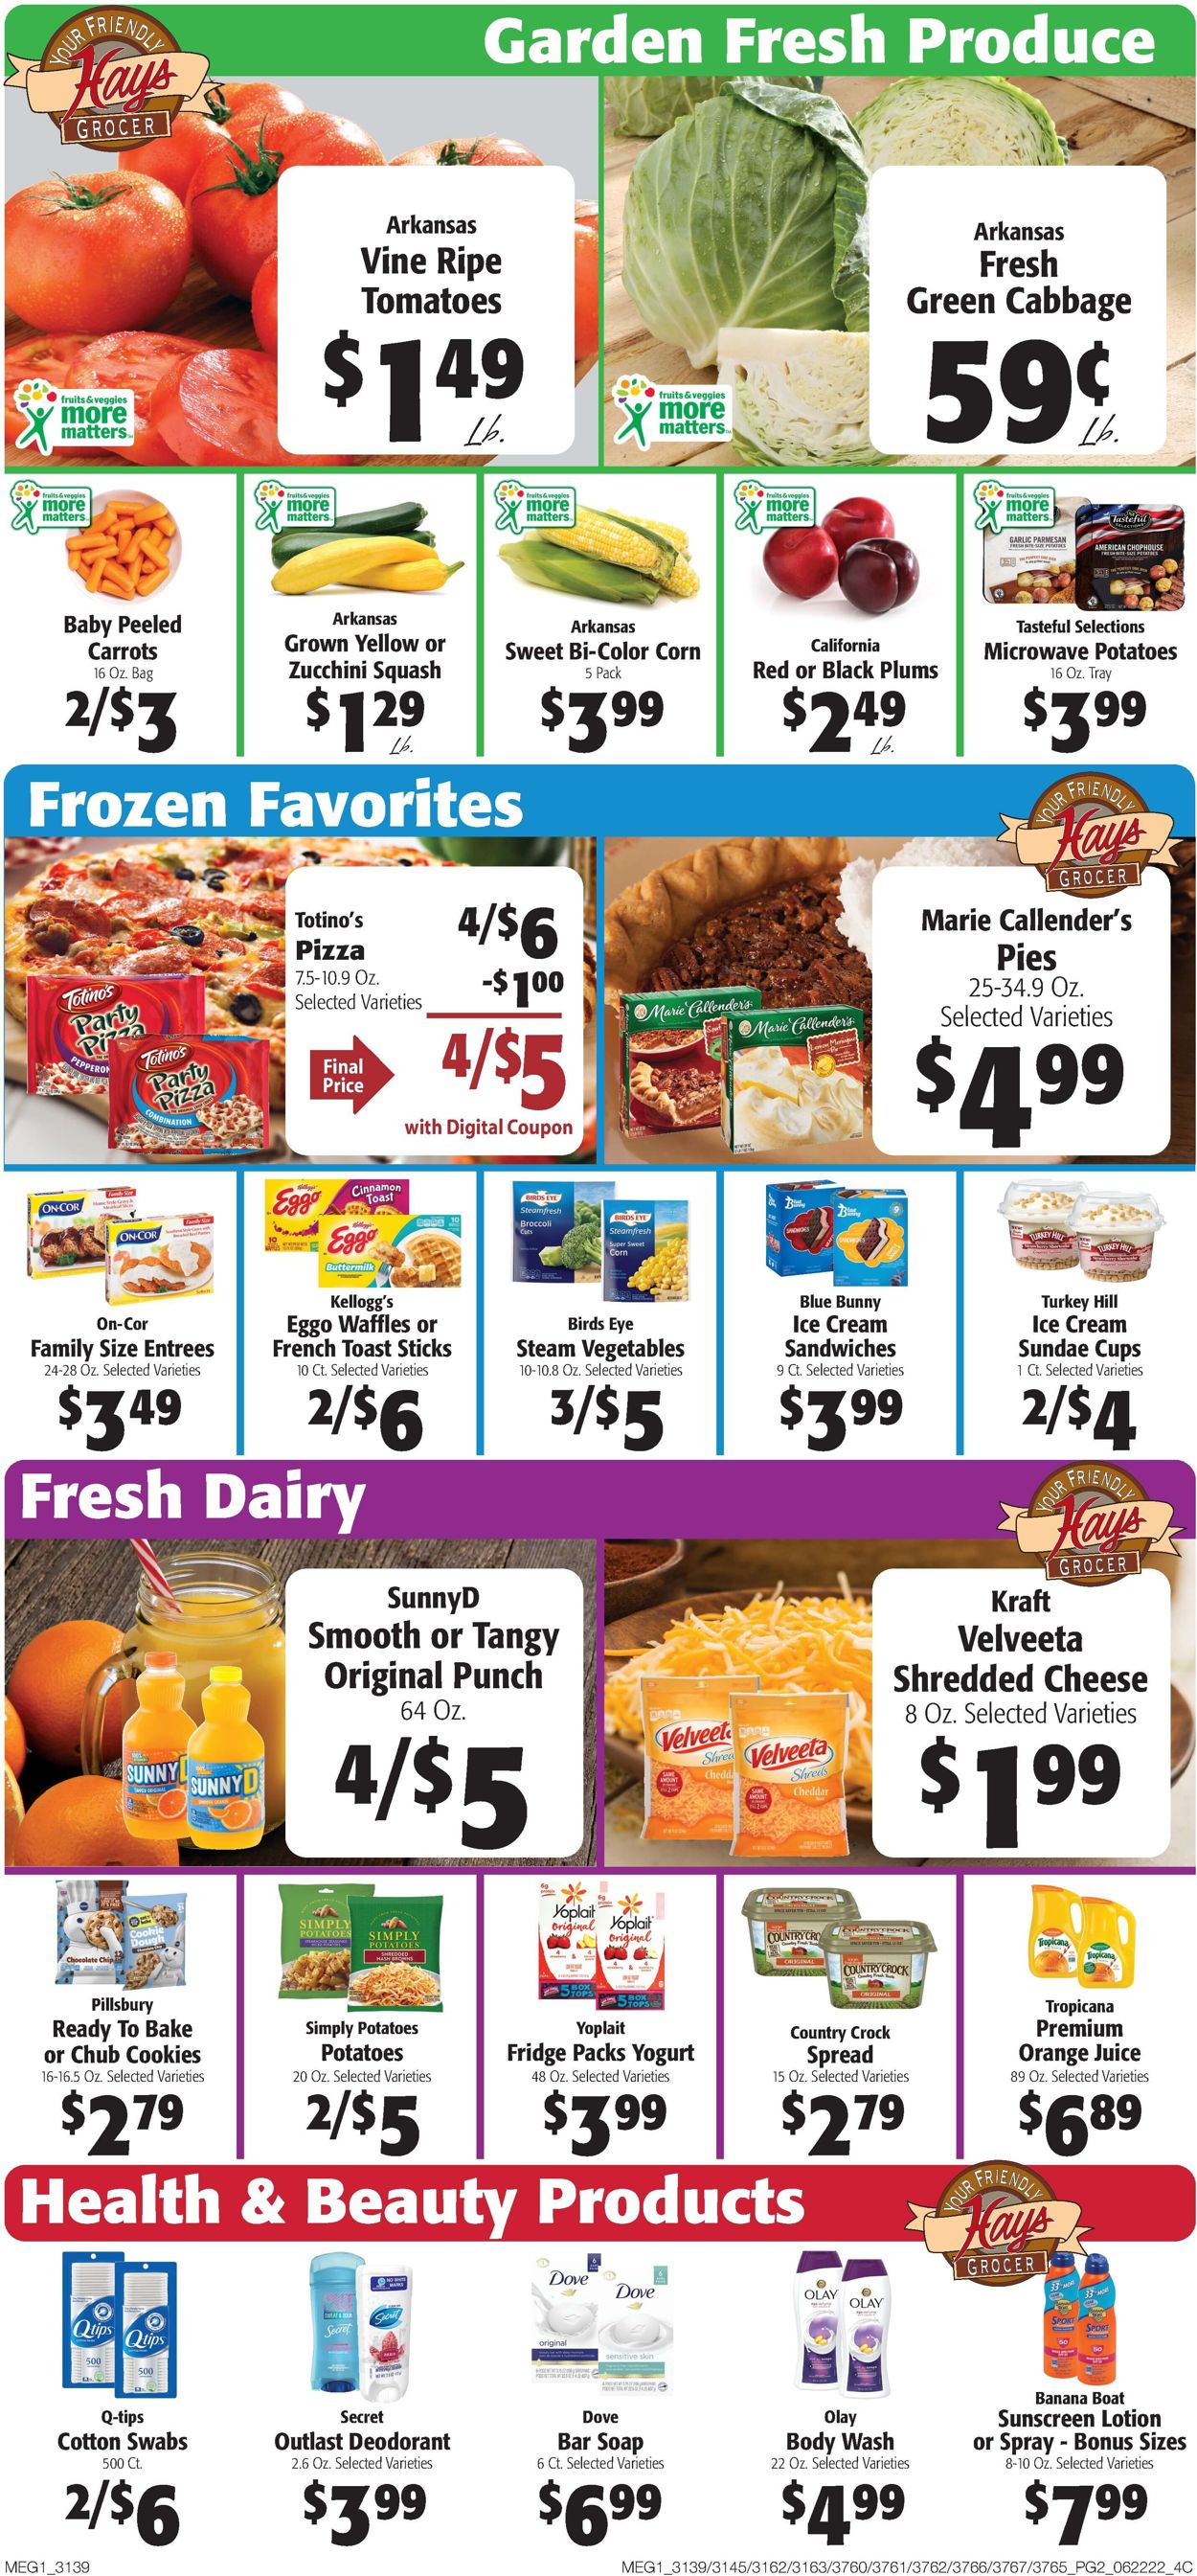 Hays Supermarket Current weekly ad 06/22 06/28/2022 [2] frequent